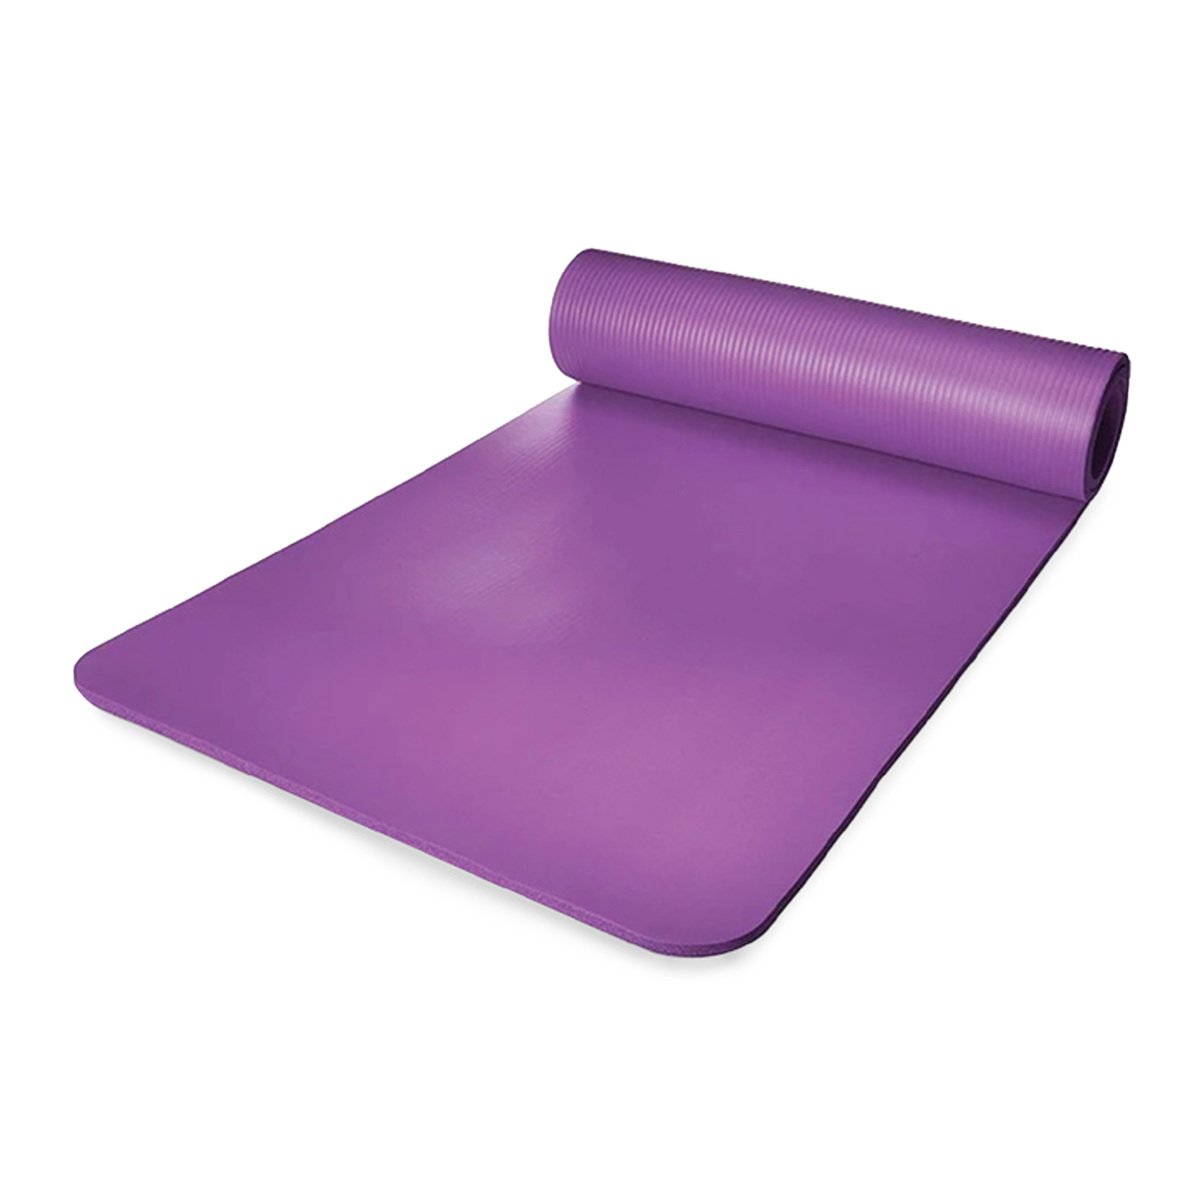 Sports Champion Exercise Mat 10mm